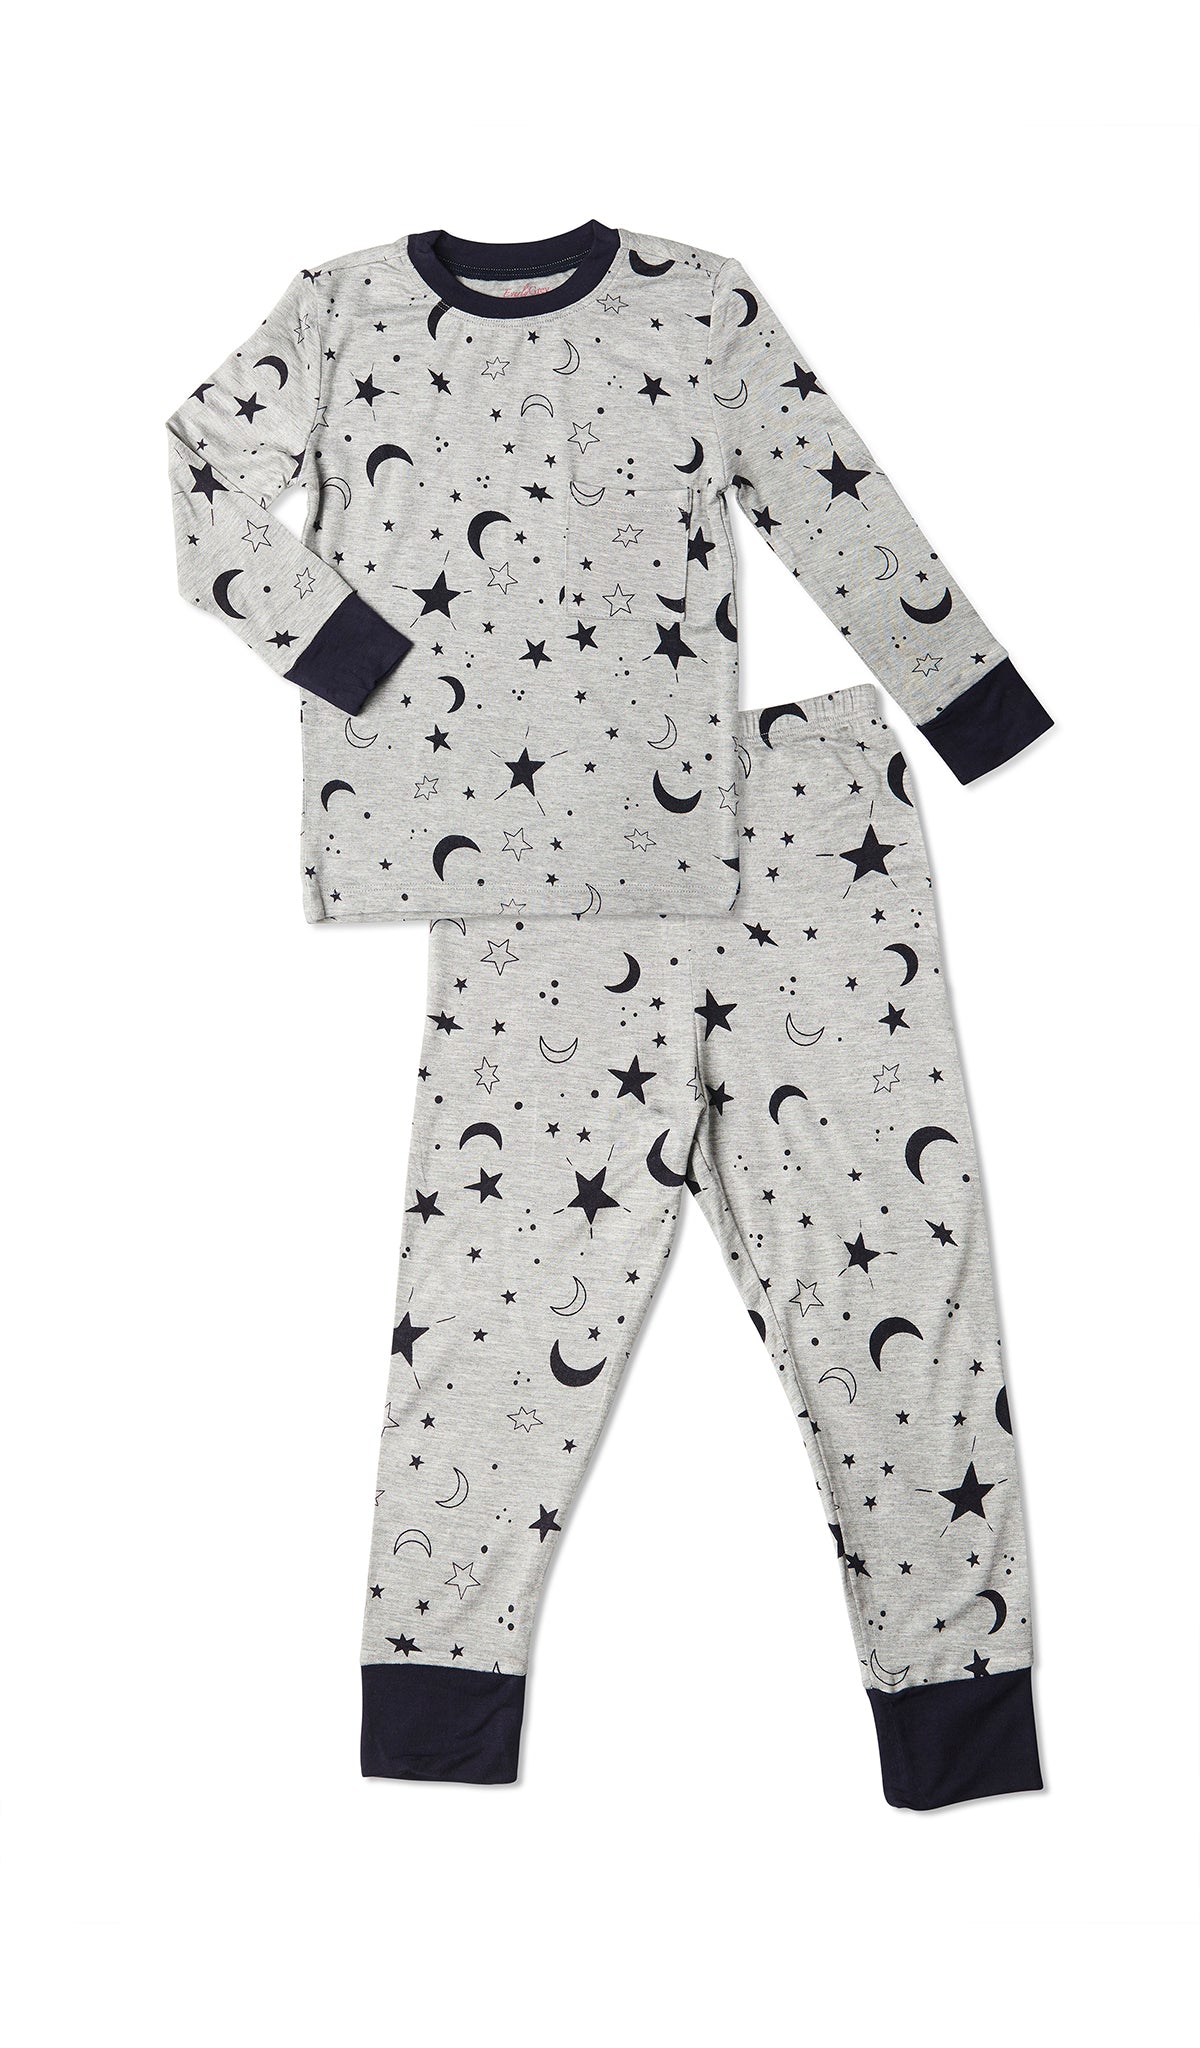 Twinkle Night Emerson Kids 2-Piece Pant PJ. Long sleeve top with cuff trim and long pant with cuff trim.